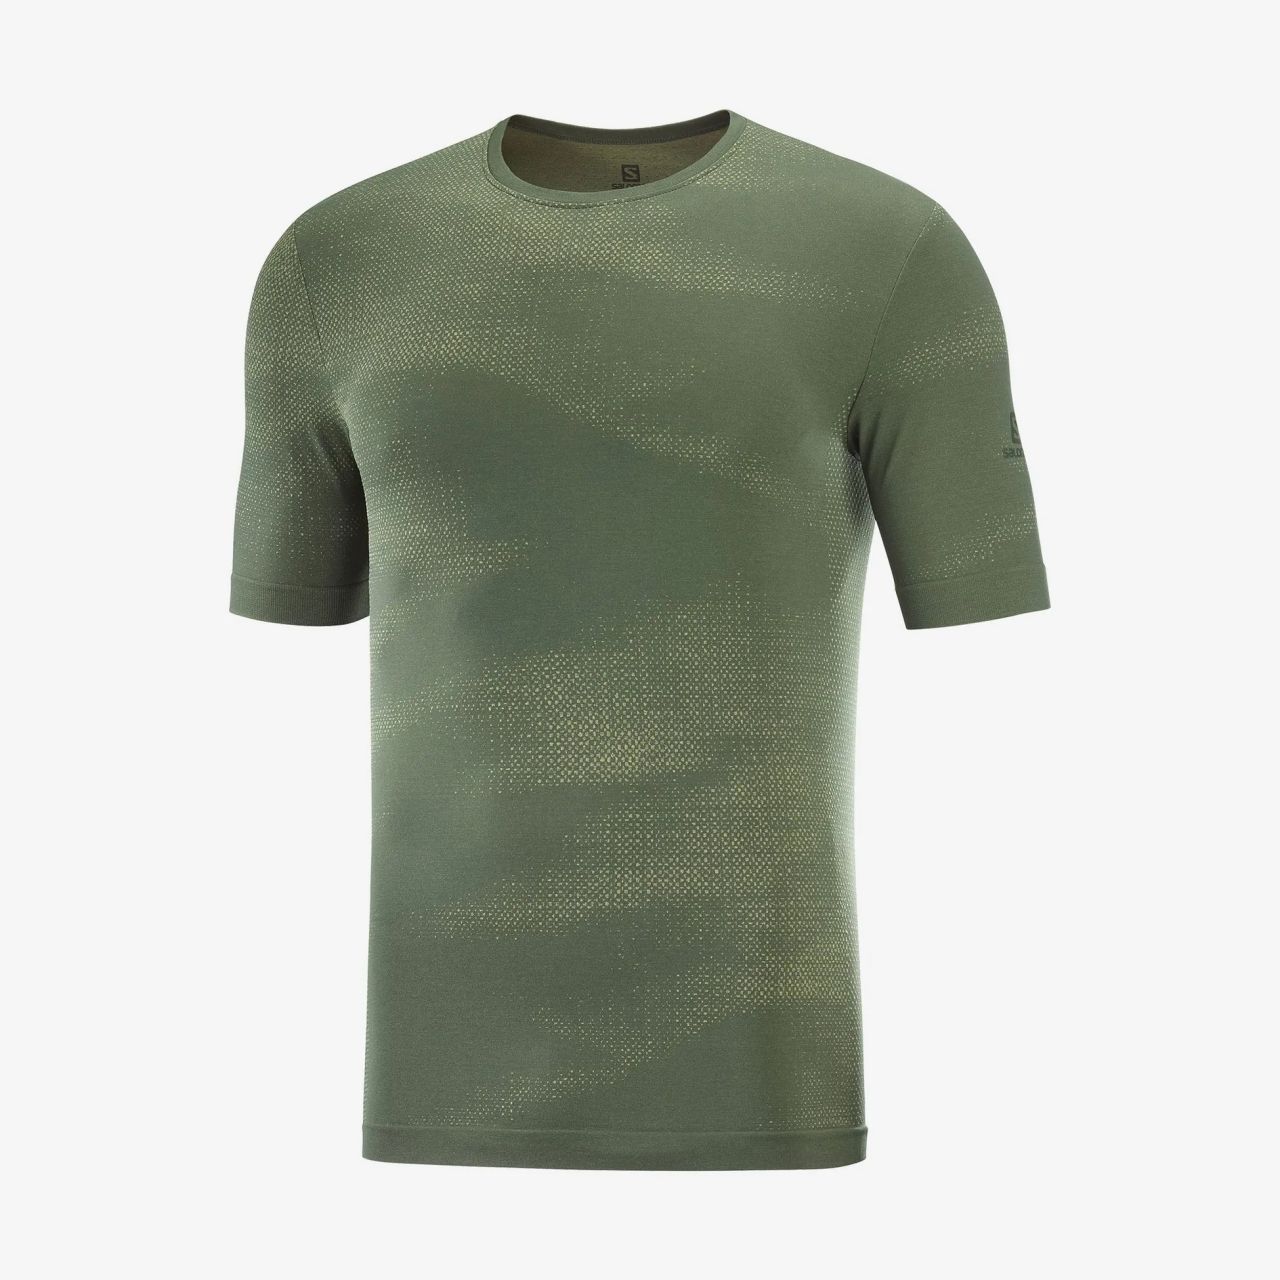 SALOMON ESSENTIAL SEAMLESS SS TEE OLIVE NIGHT Tee shirt sans coutures